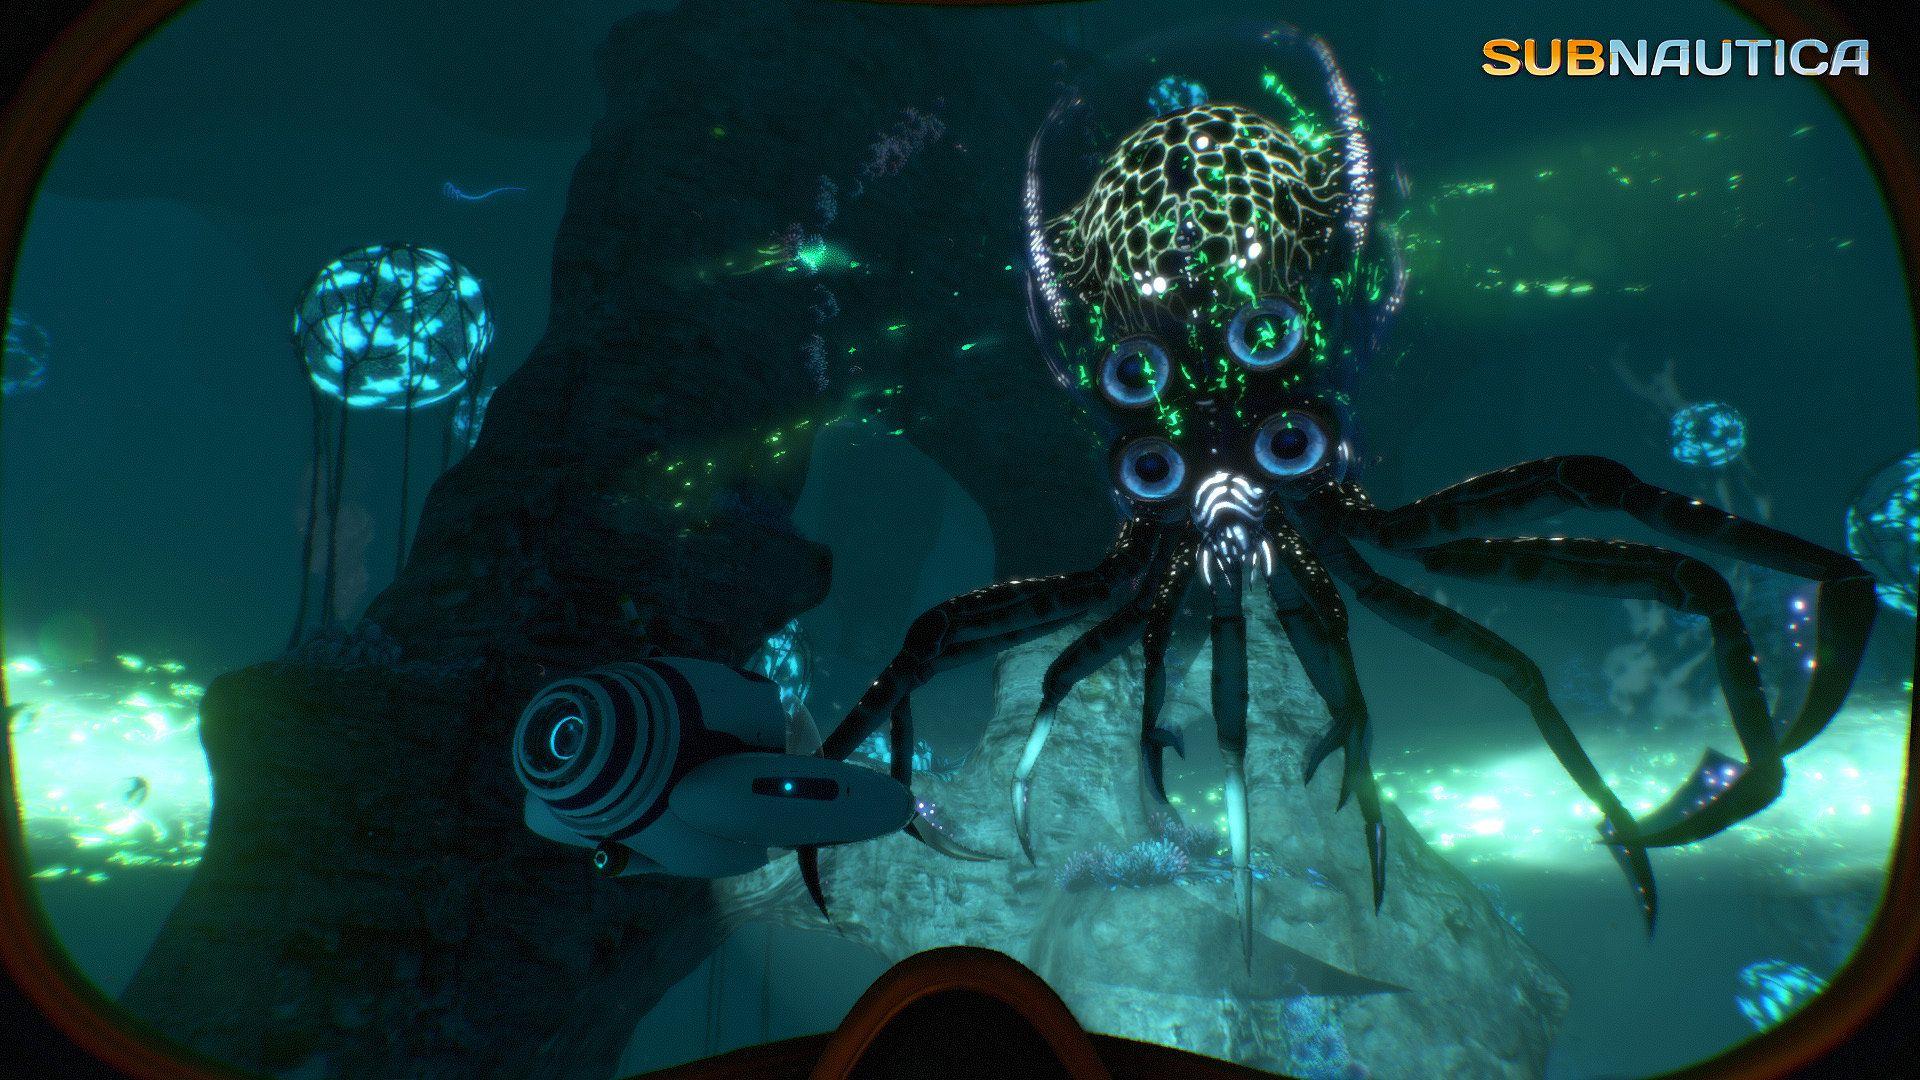 Buy Subnautica on PlayStation 4. Free UK Delivery